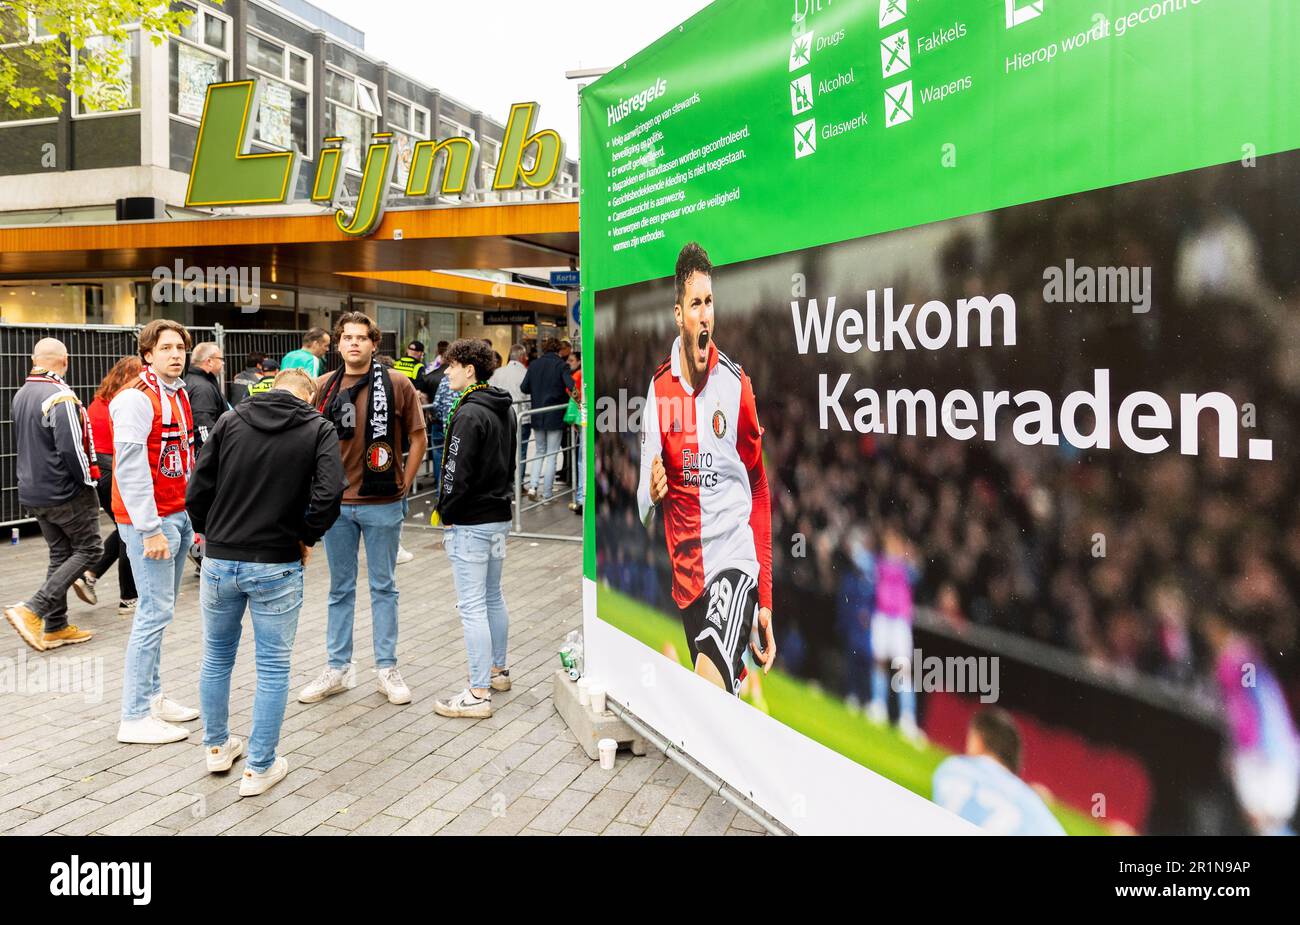 ROTTERDAM - Feyenoord fans arrive at the entrance of the ceremony area. The Rotterdam football club won the national championship and will be honored on the Coolsingel. ANP IRIS VAN DEN BROEK netherlands out - belgium out Stock Photo